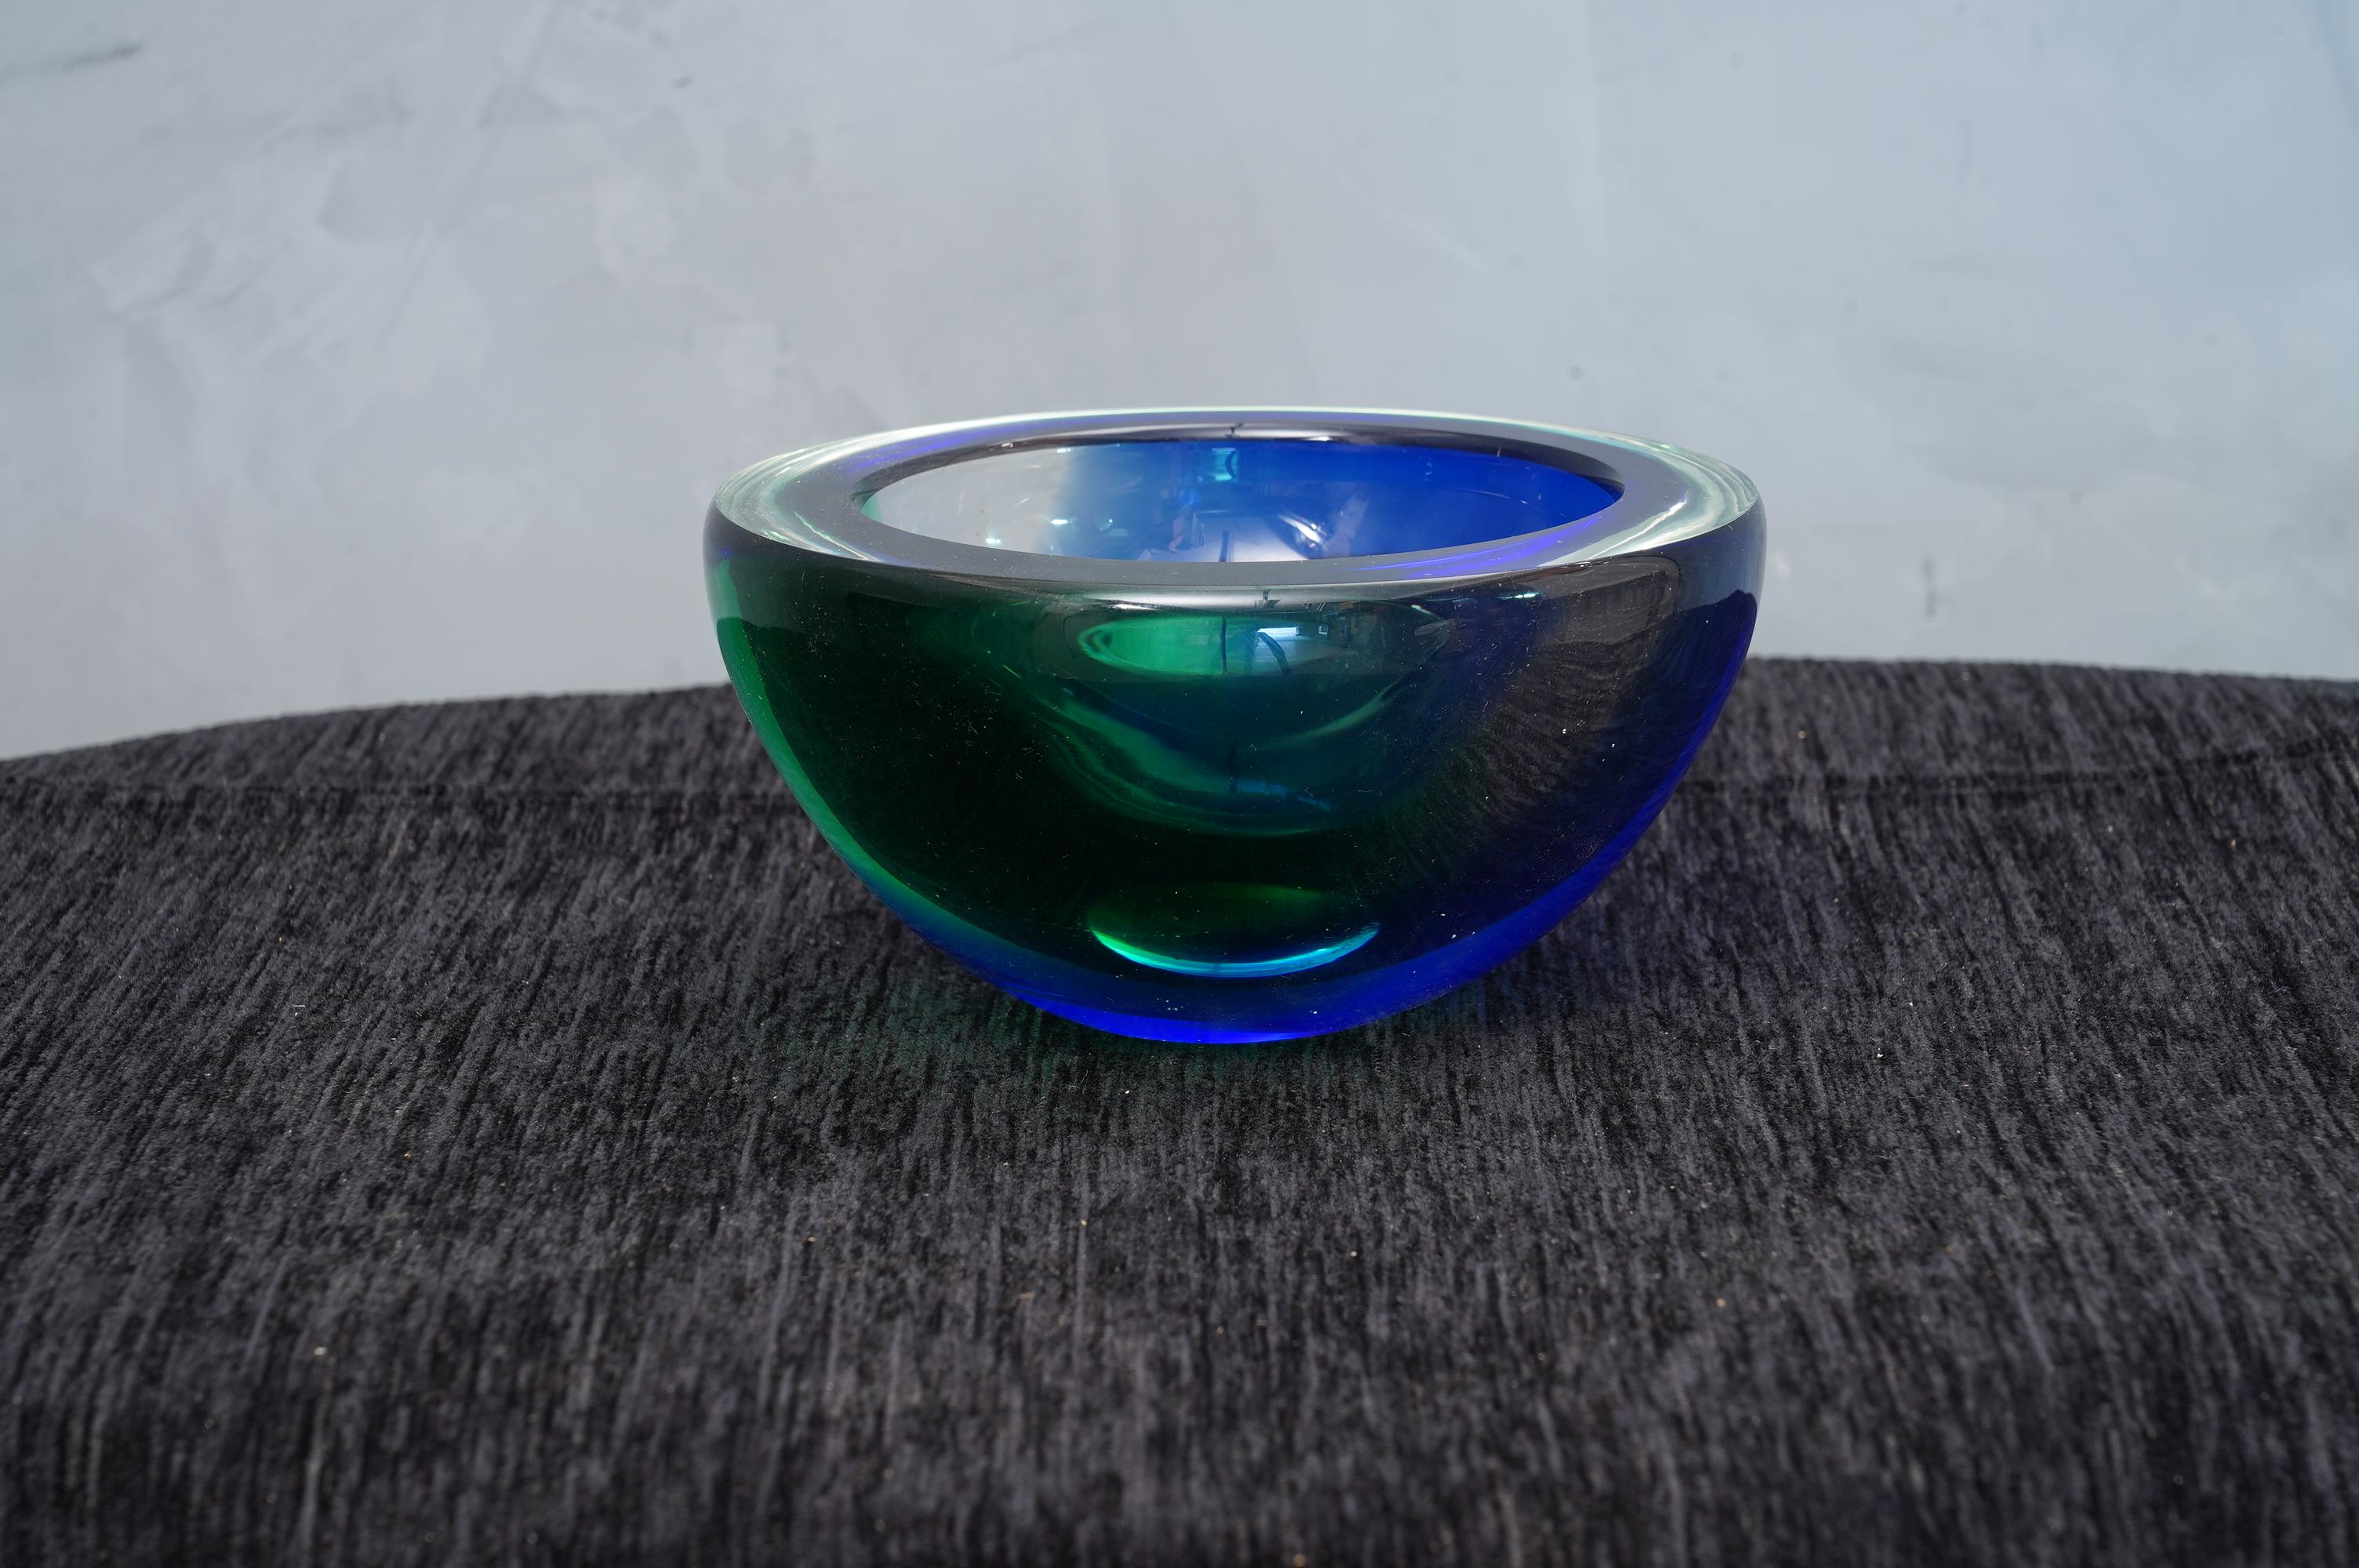 Ashtray formed by a particular submerged glass, signed Venini, with a wonderful double green and blue color.

The ashtray is in Murano glass, circular in shape, and with a particular transparent green and blue color. The signature is placed on the